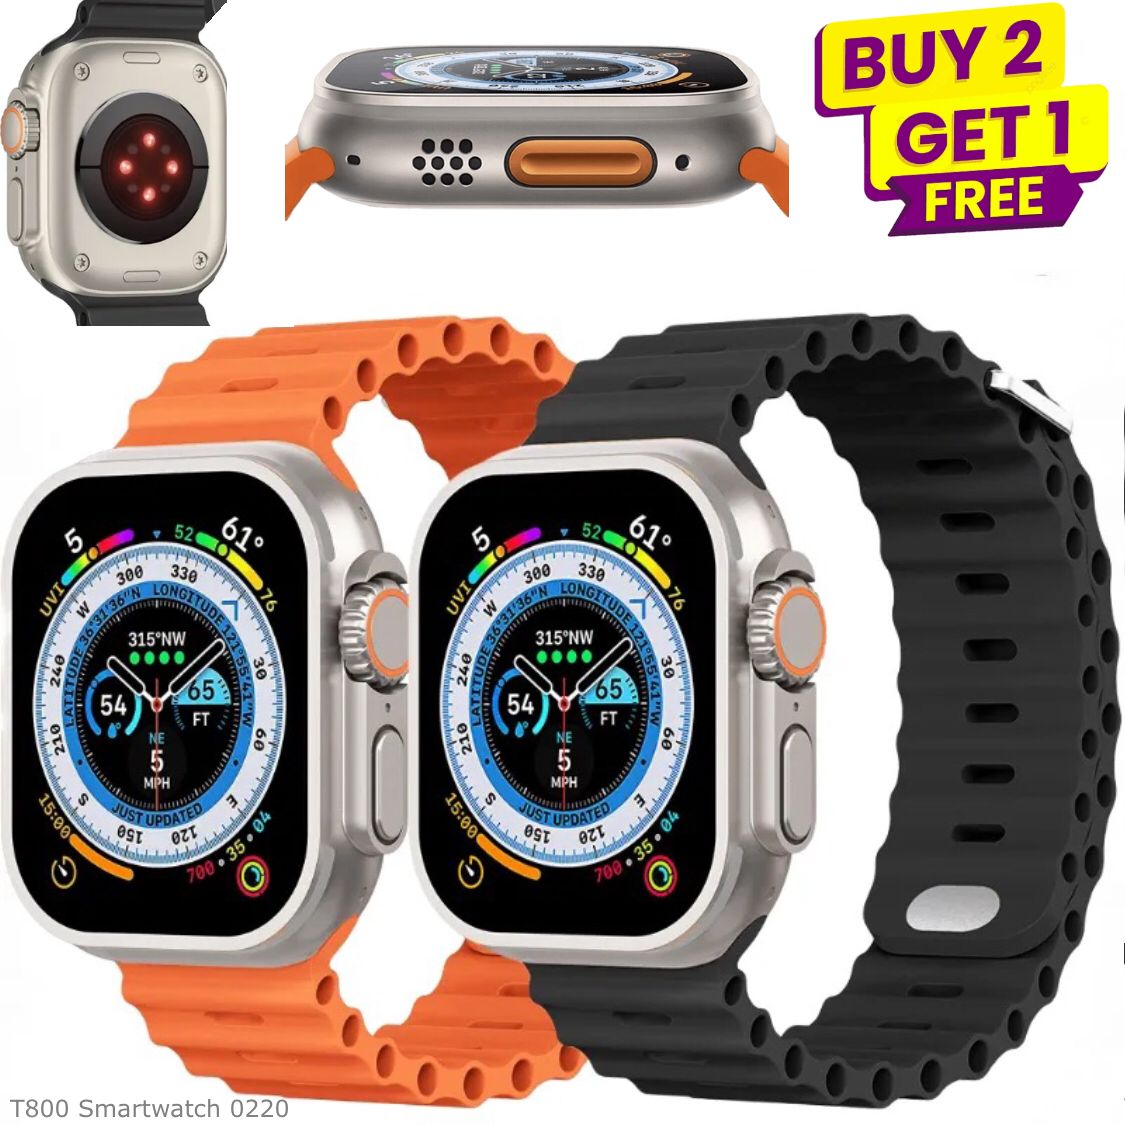 T800 Smart Watch with Wireless Charger | Buy 2 Get 1 Free